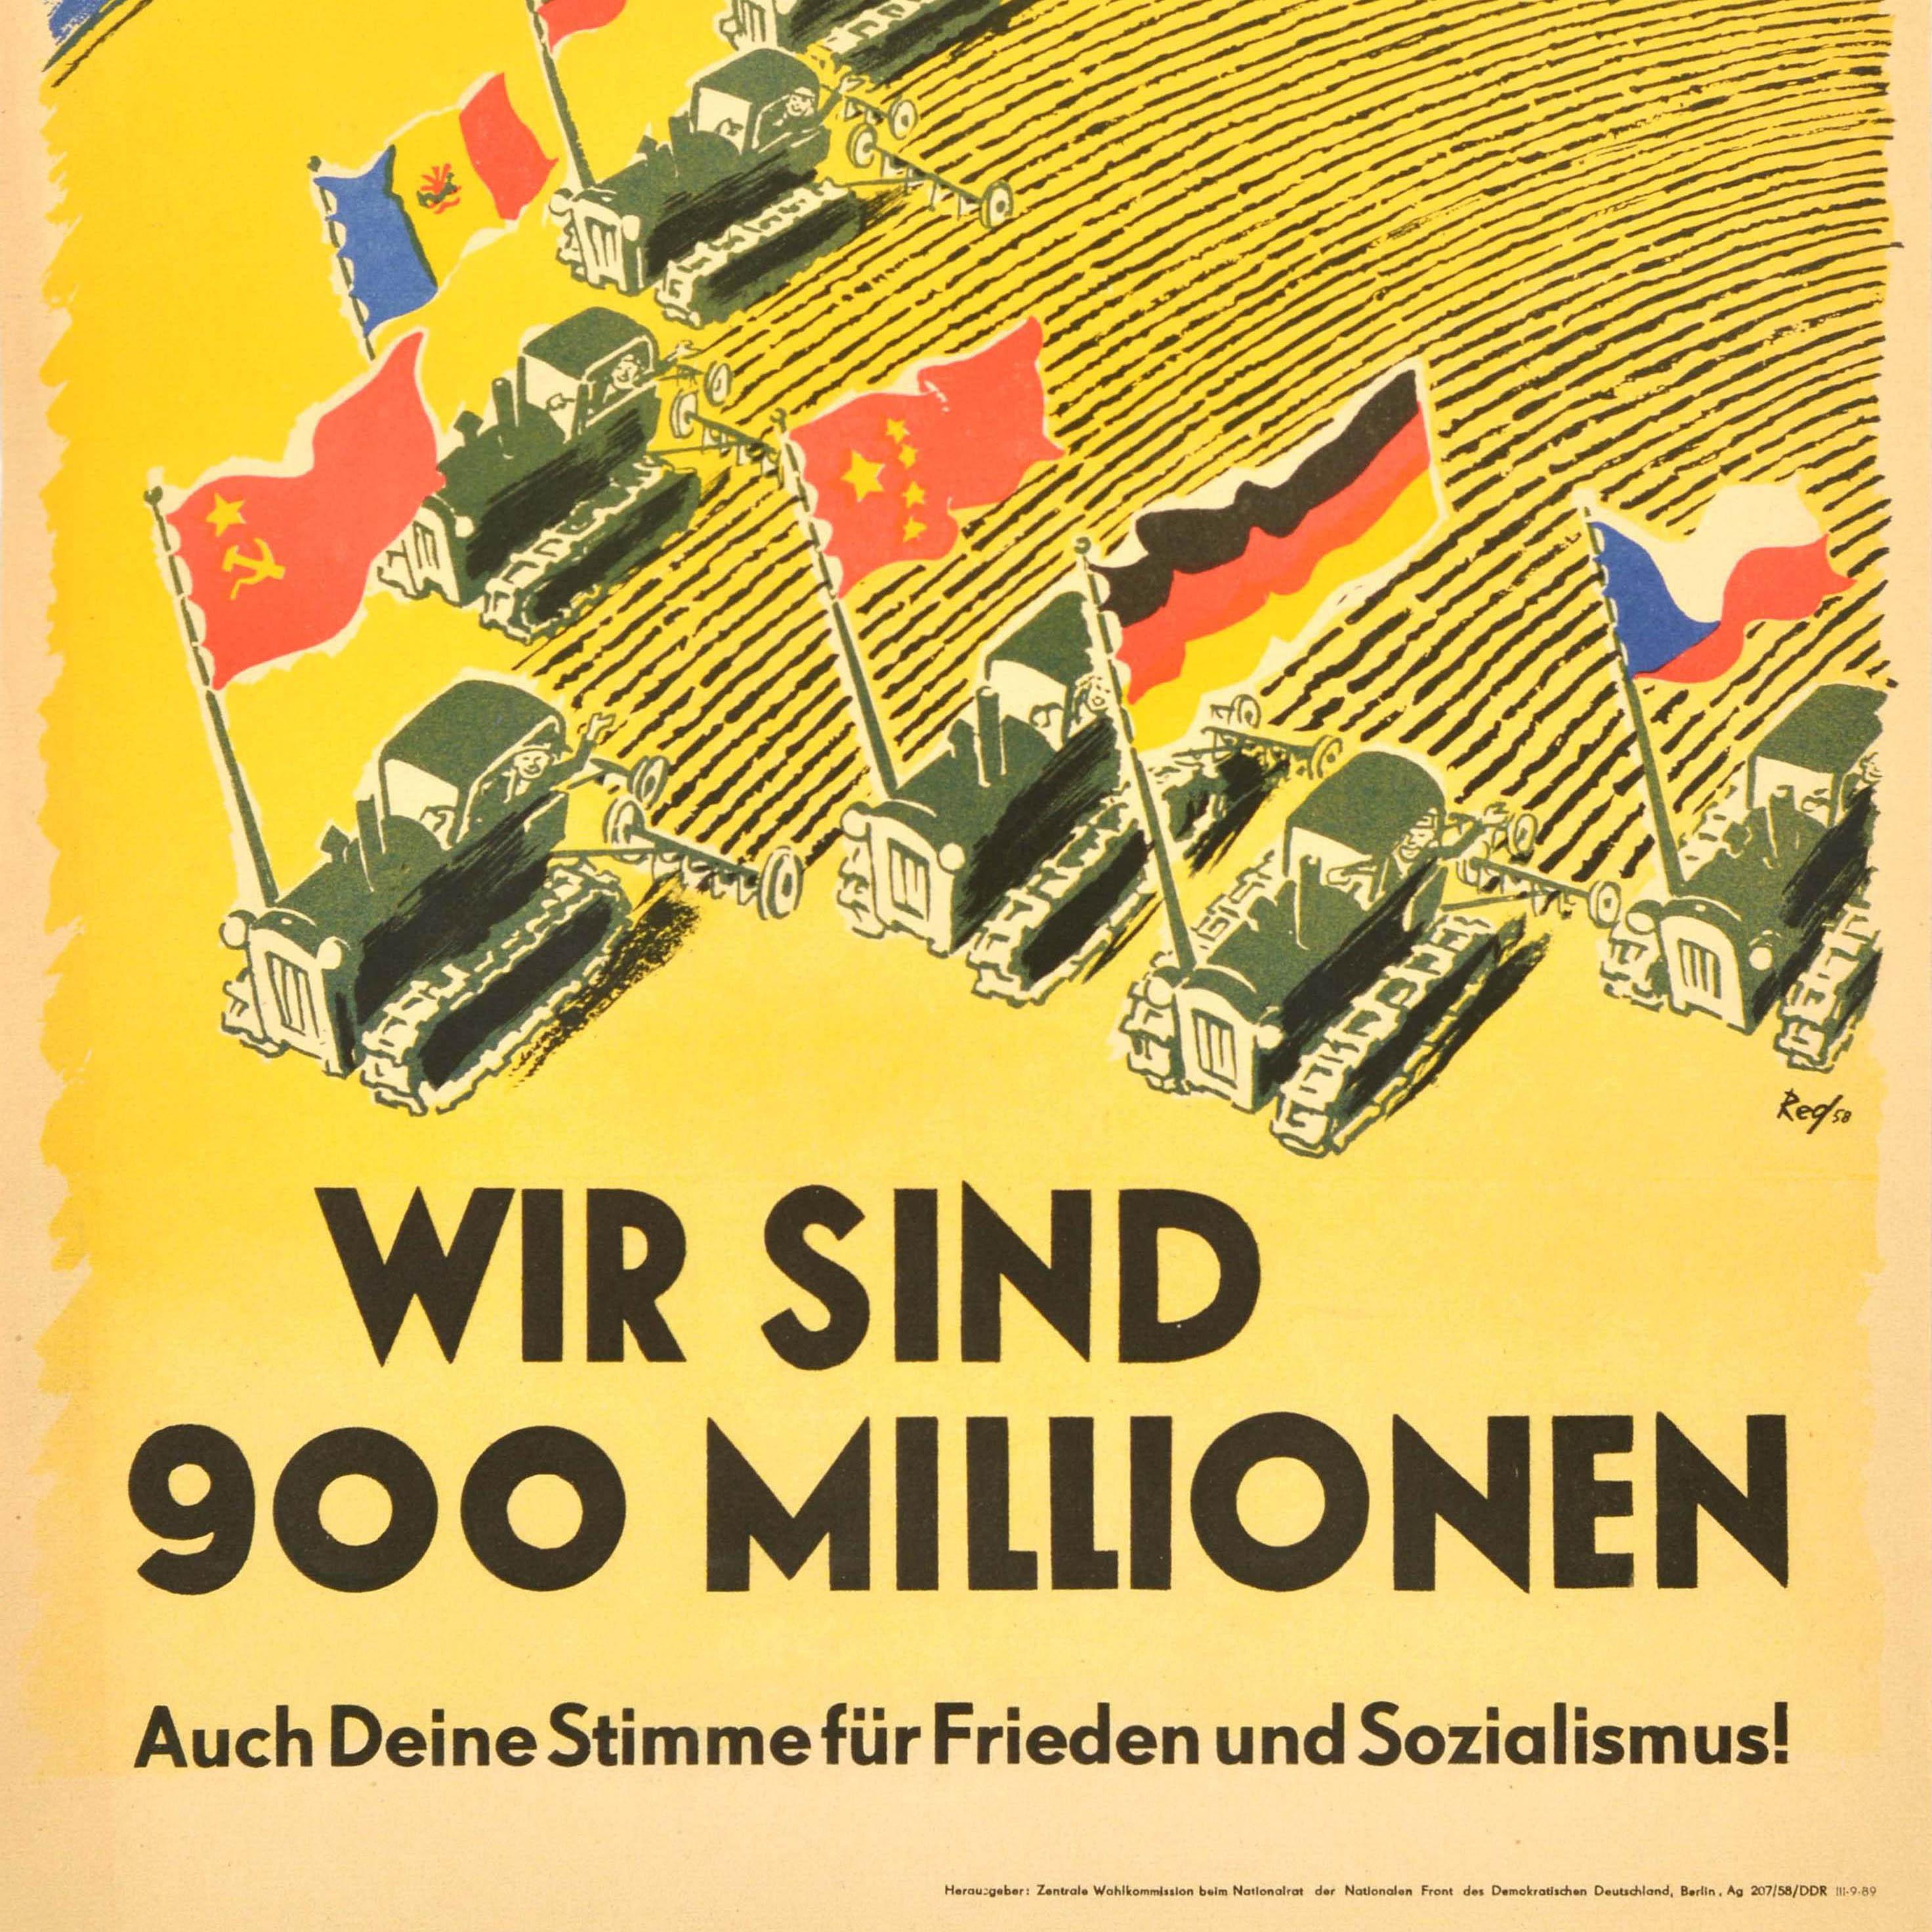 Original vintage East German political propaganda poster - Wir sind 900 millionen Auch deine stimme fur frieden und sozialismus! / We are 900 million Also your vote for peace and socialism - featuring an illustration of tractors farming the curve of